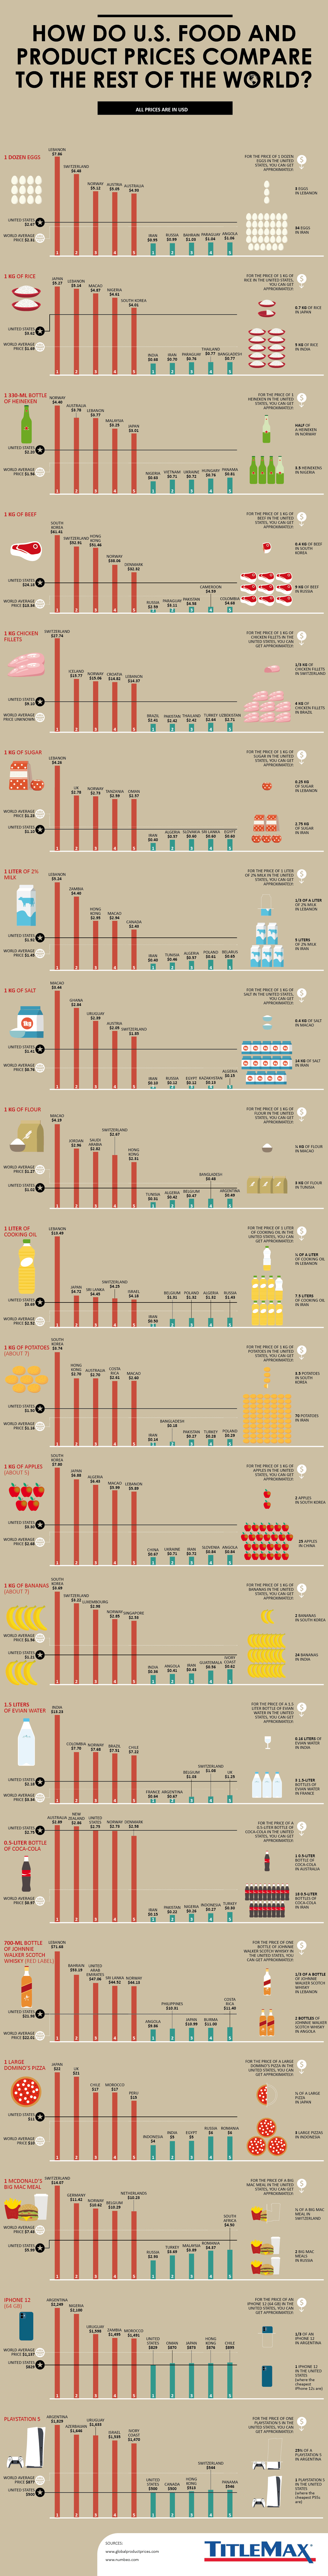 Comparison of Food Prices in US Versus Worldwide